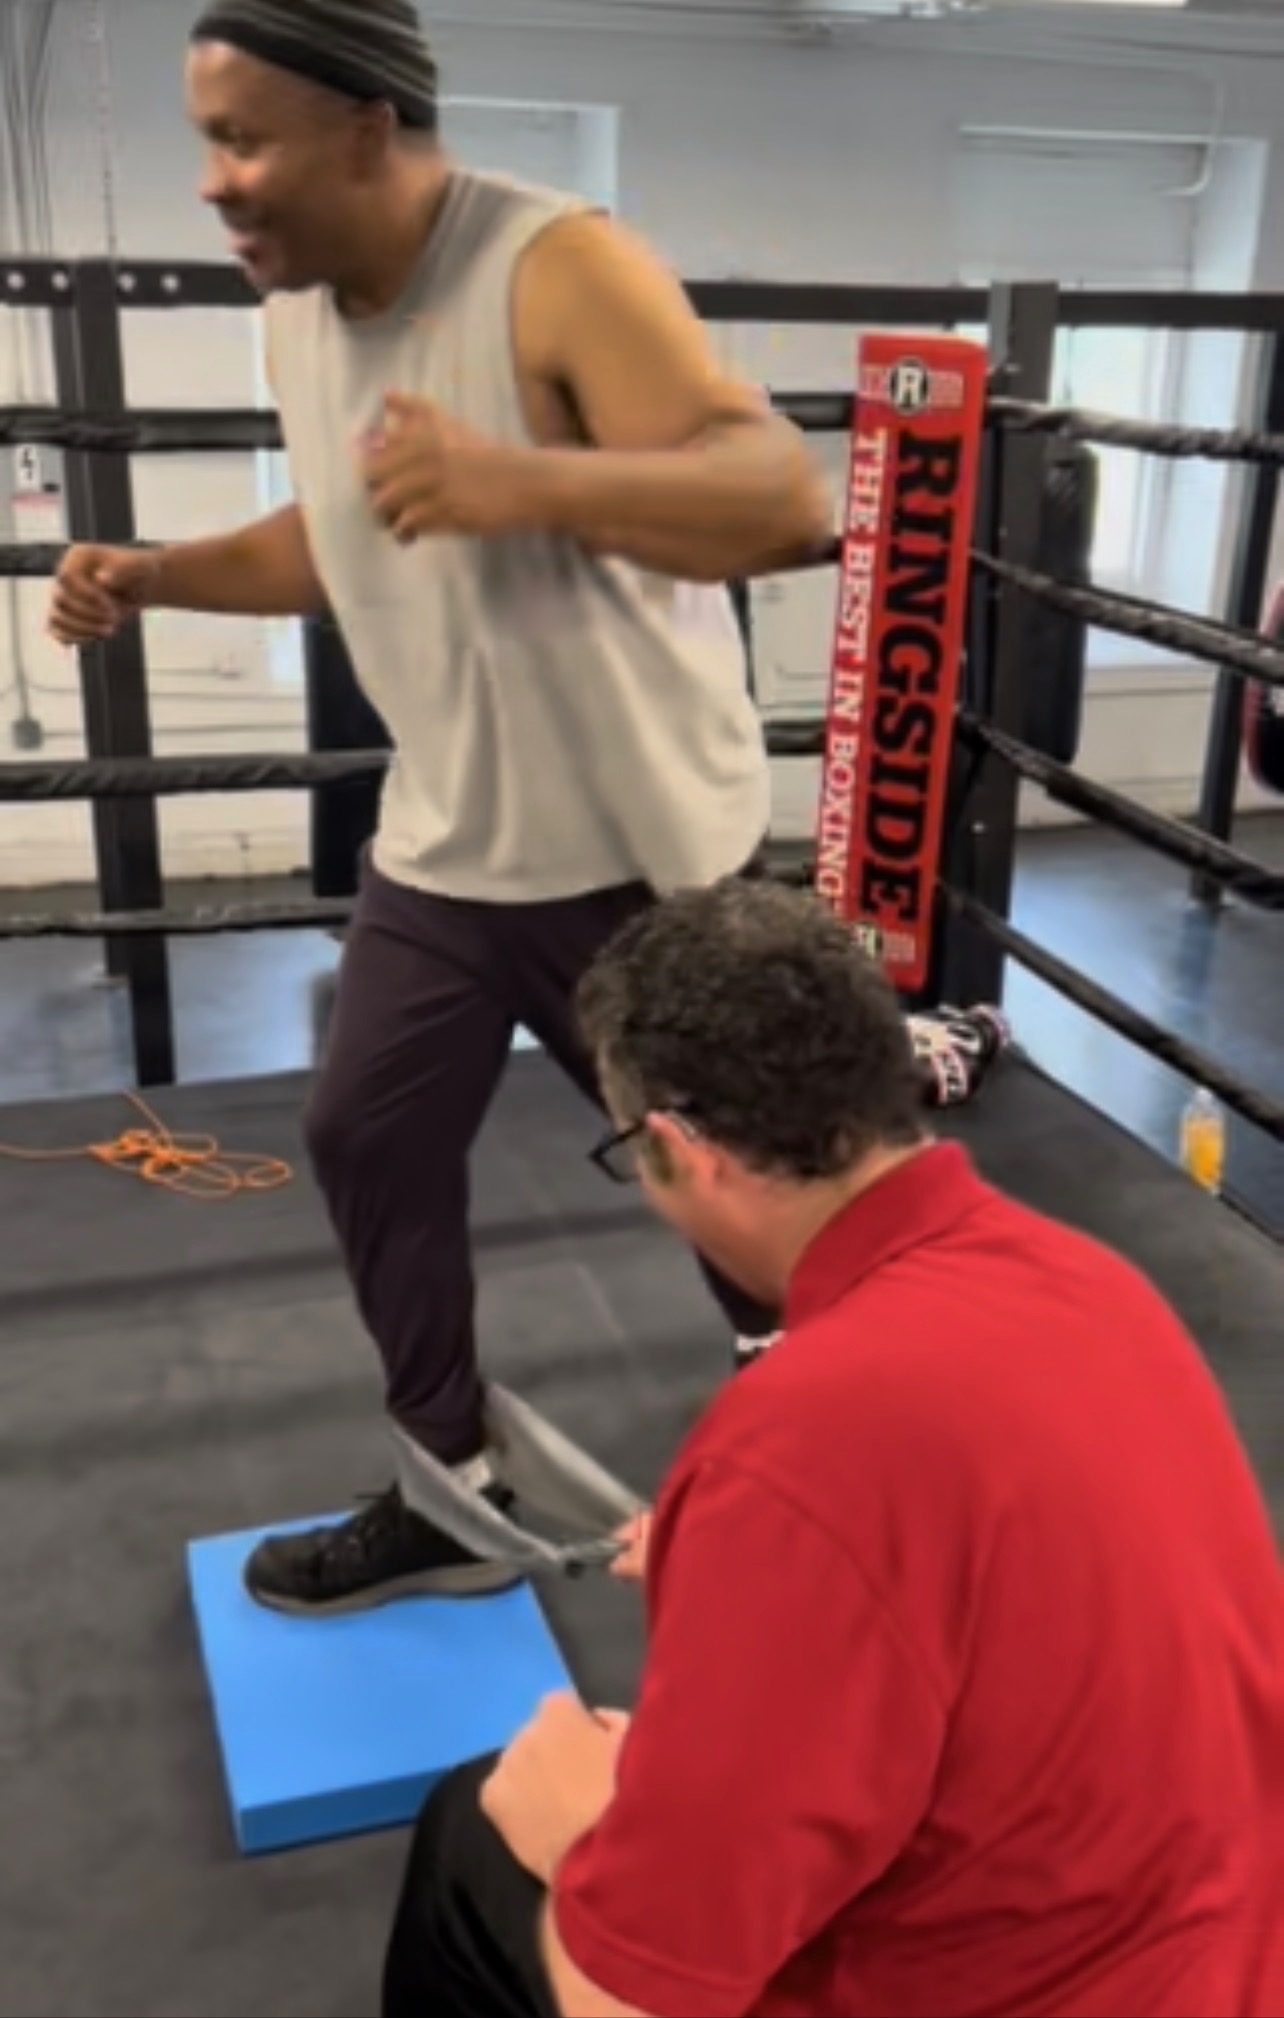 "Dr Paolini is the team chiropractor for the Tim Witherspoon training camp and the creator of the prehab program used by Tim and the boxers he trains."